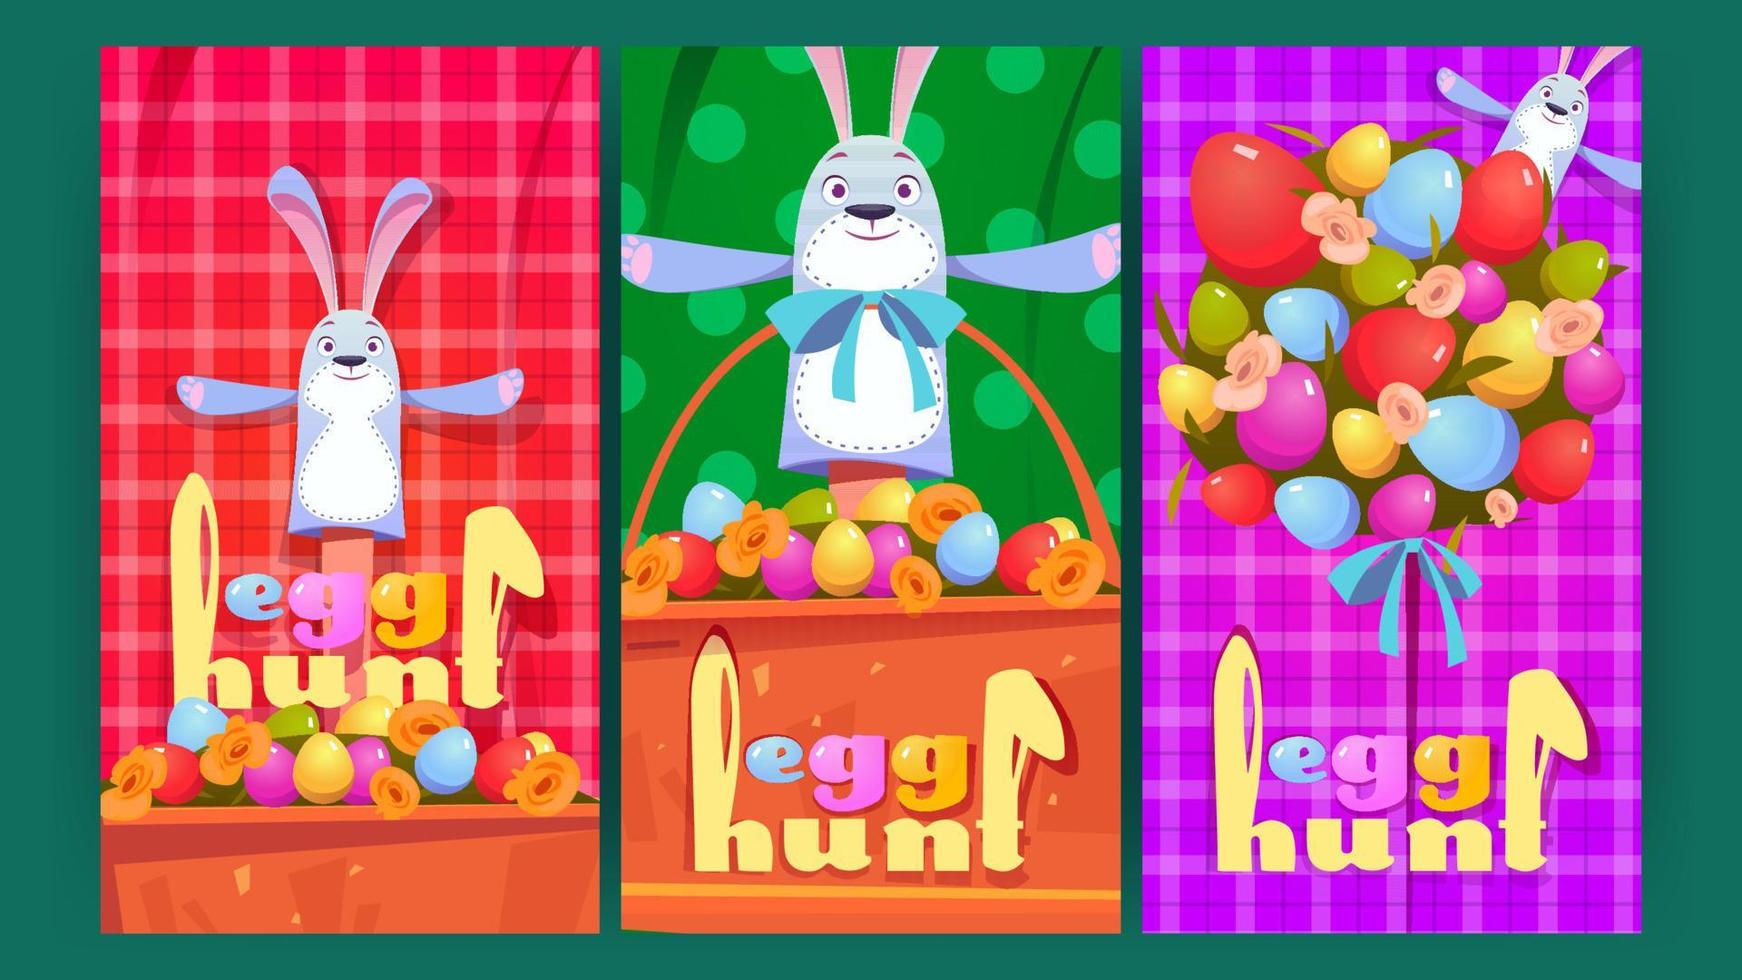 Egg hunt poster with cute bunny, Easter flyers vector